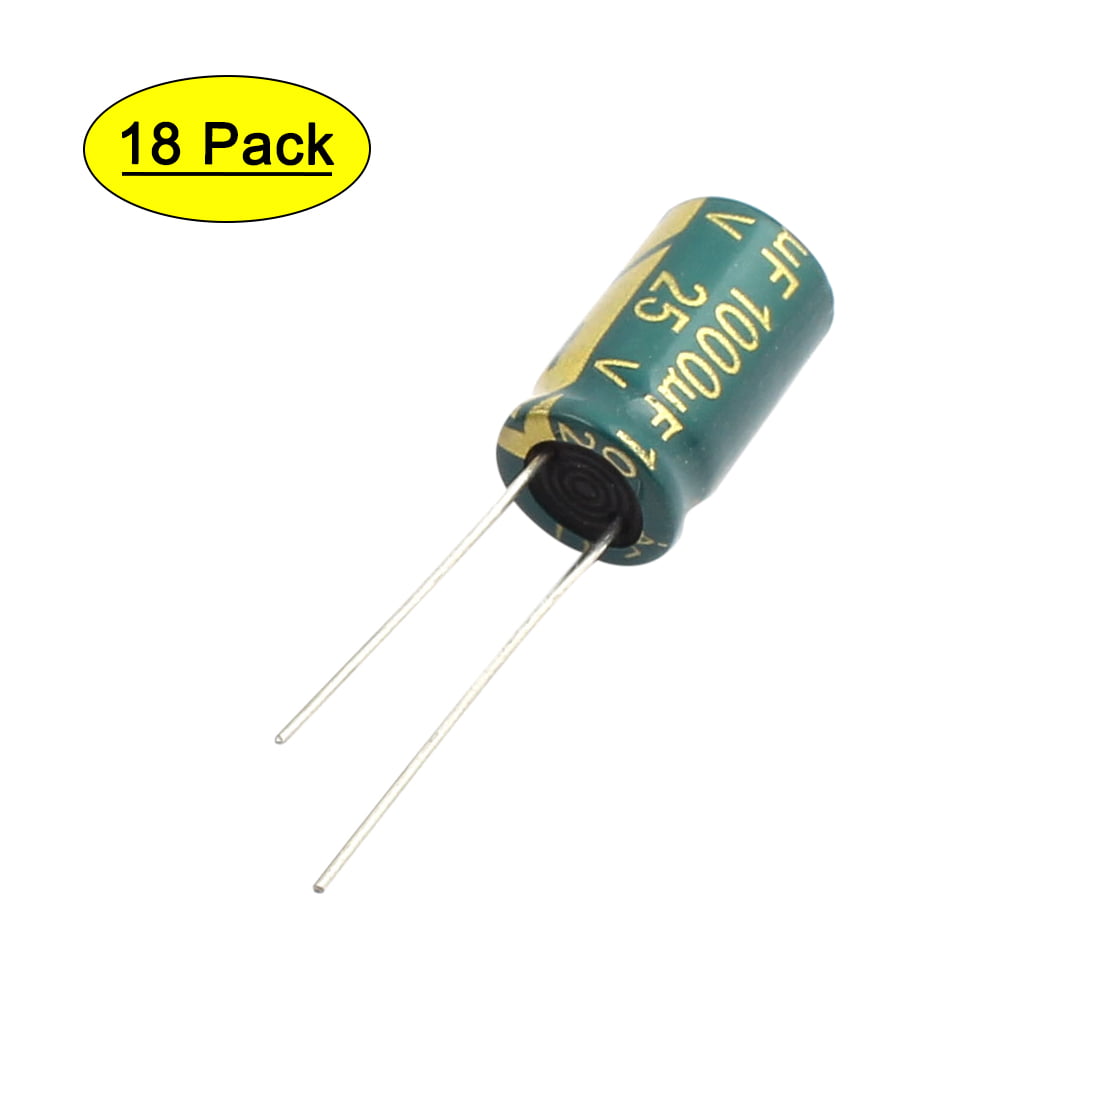 1000uF 25V Radial Electrolytic Capacitor 1000mF25 Volts 1000 uF 10X20mm 10 Piece